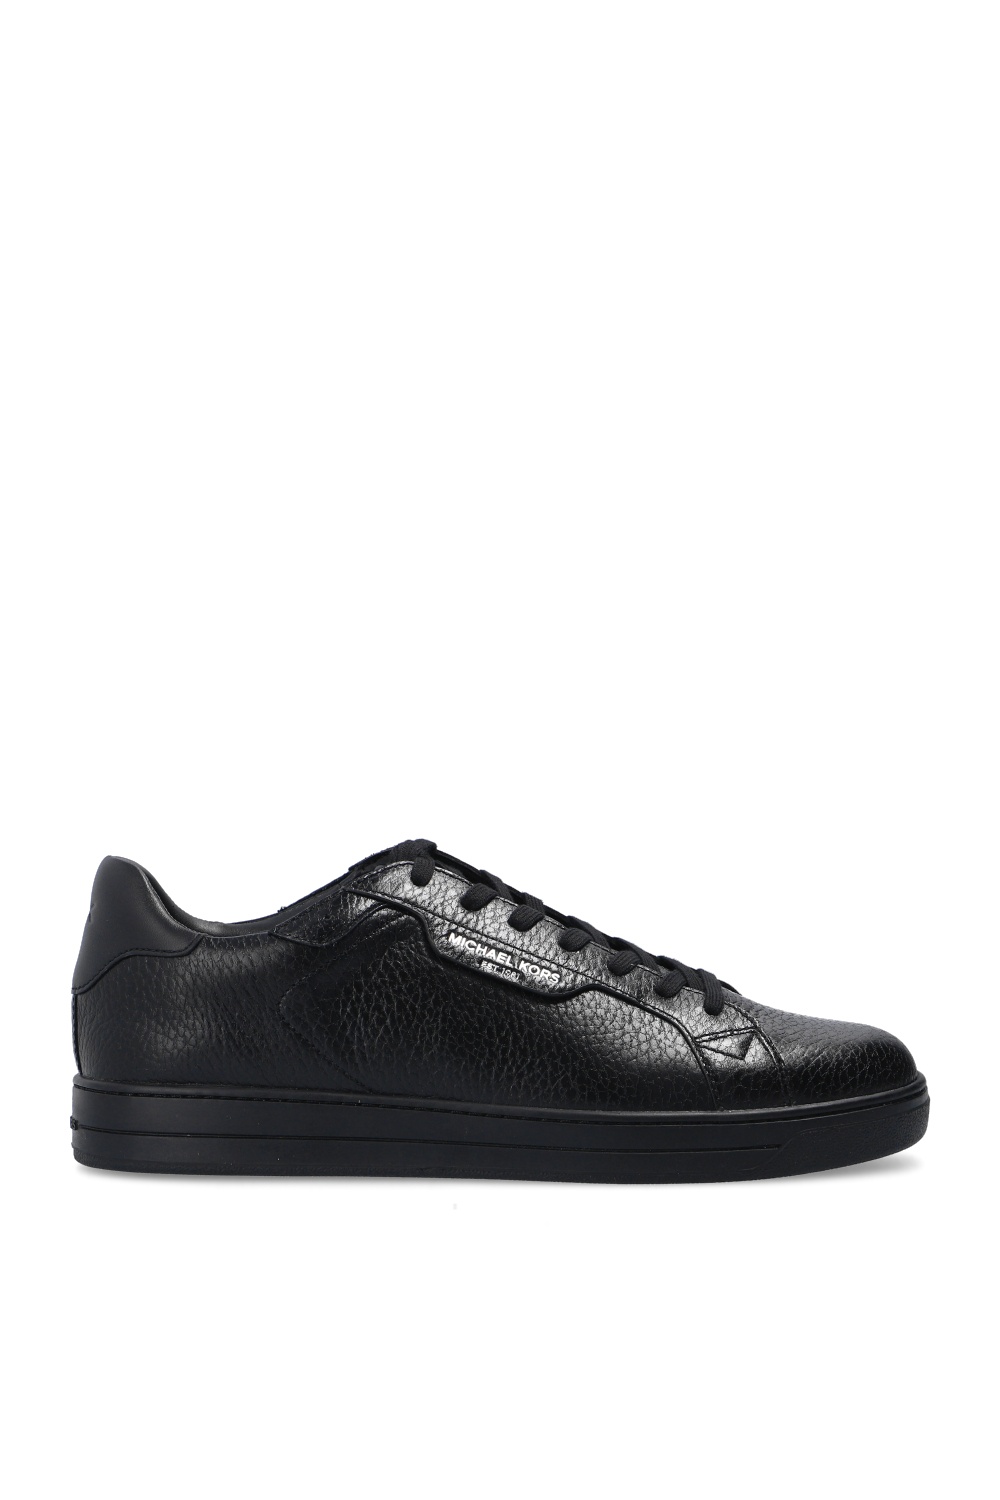 Michael Kors, Shoes, Dare To Shine In Fabulous Michael Kors Leather  Sneakers